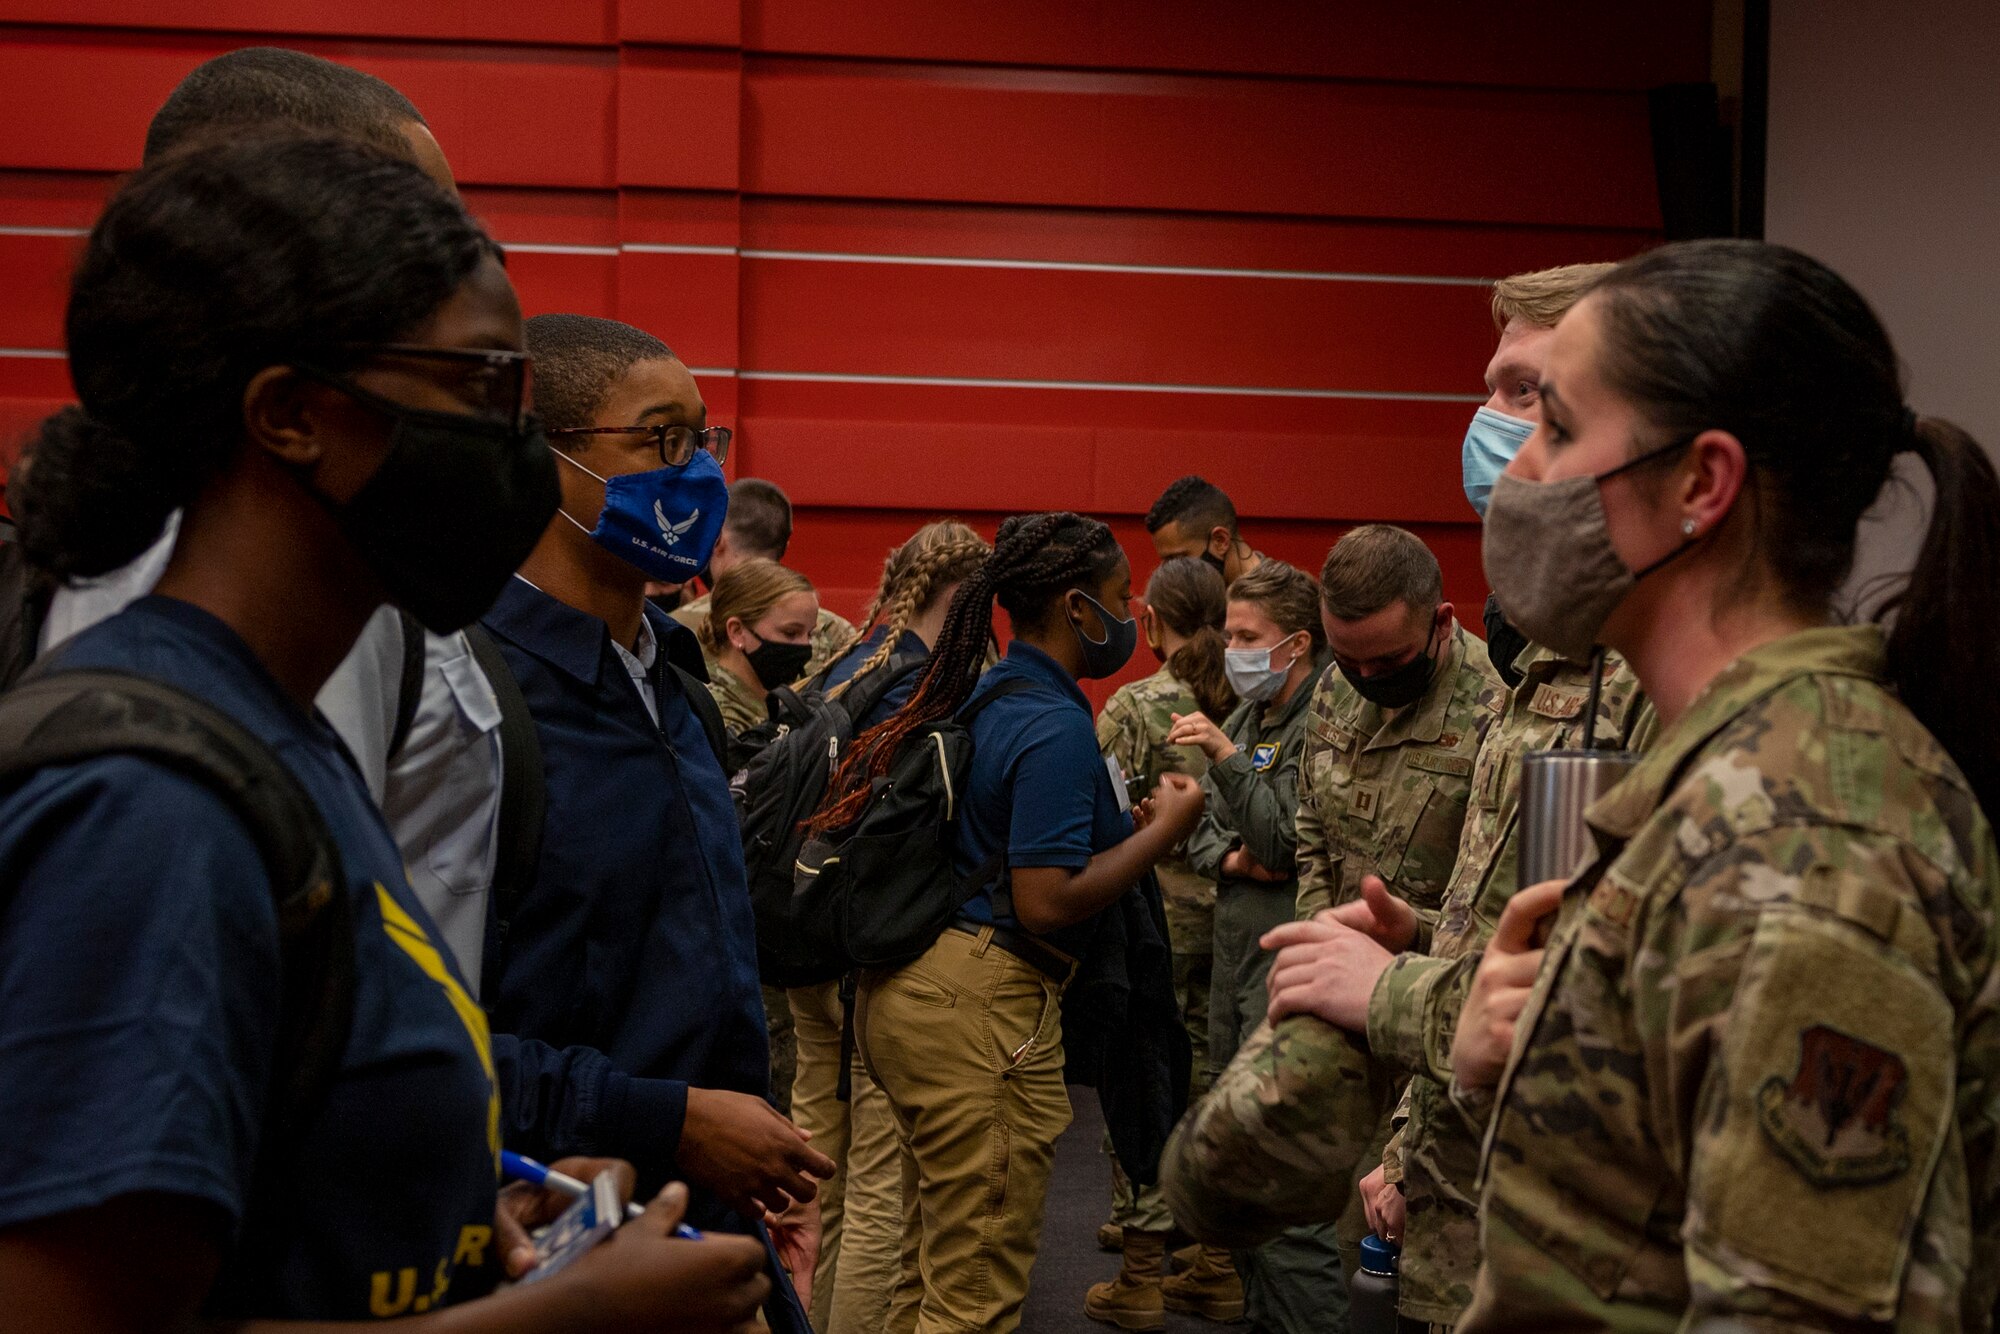 Active duty service members from Seymour Johnson Air Force Base speak with ROTC cadets after a career panel at North Carolina Agricultural and Technical State University in Greensboro, North Carolina, Oct. 28, 2021.